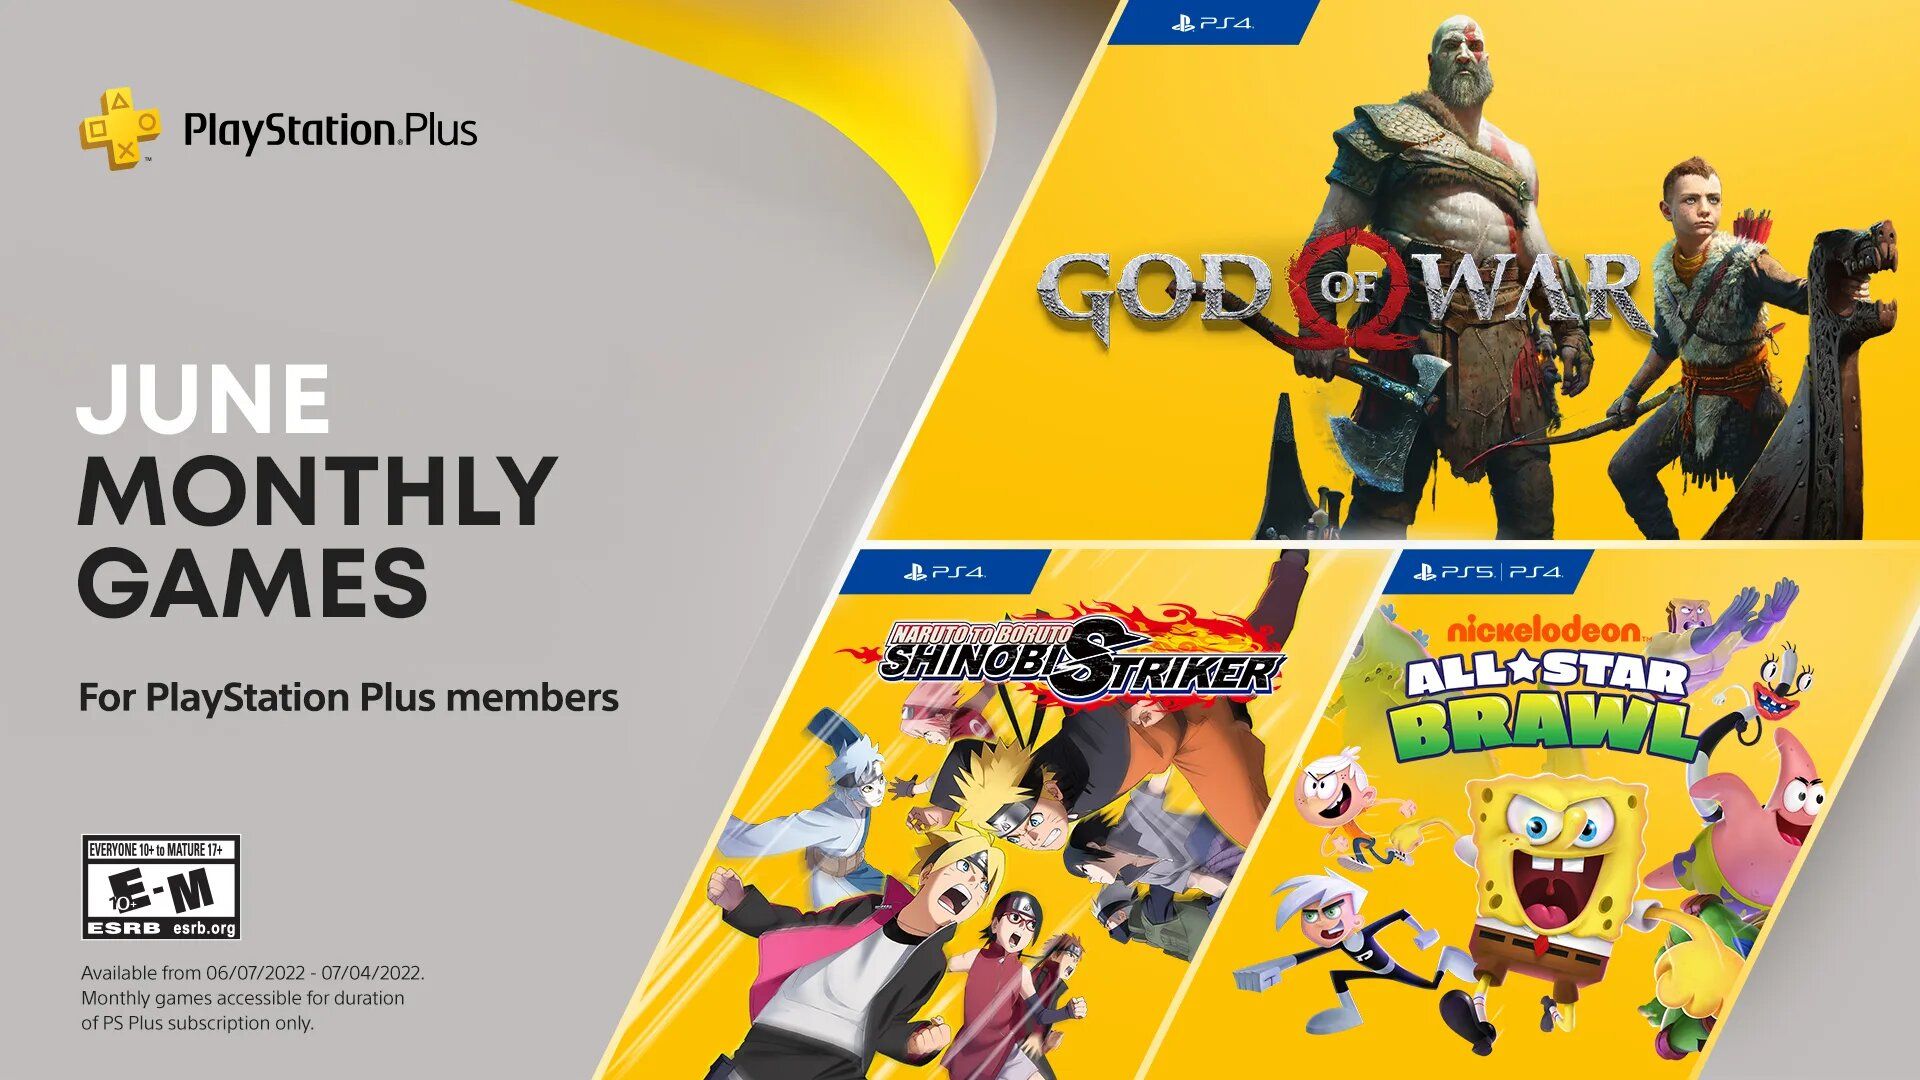 Why Some PlayStation Fans Aren't Happy About the Free PS Plus Games for